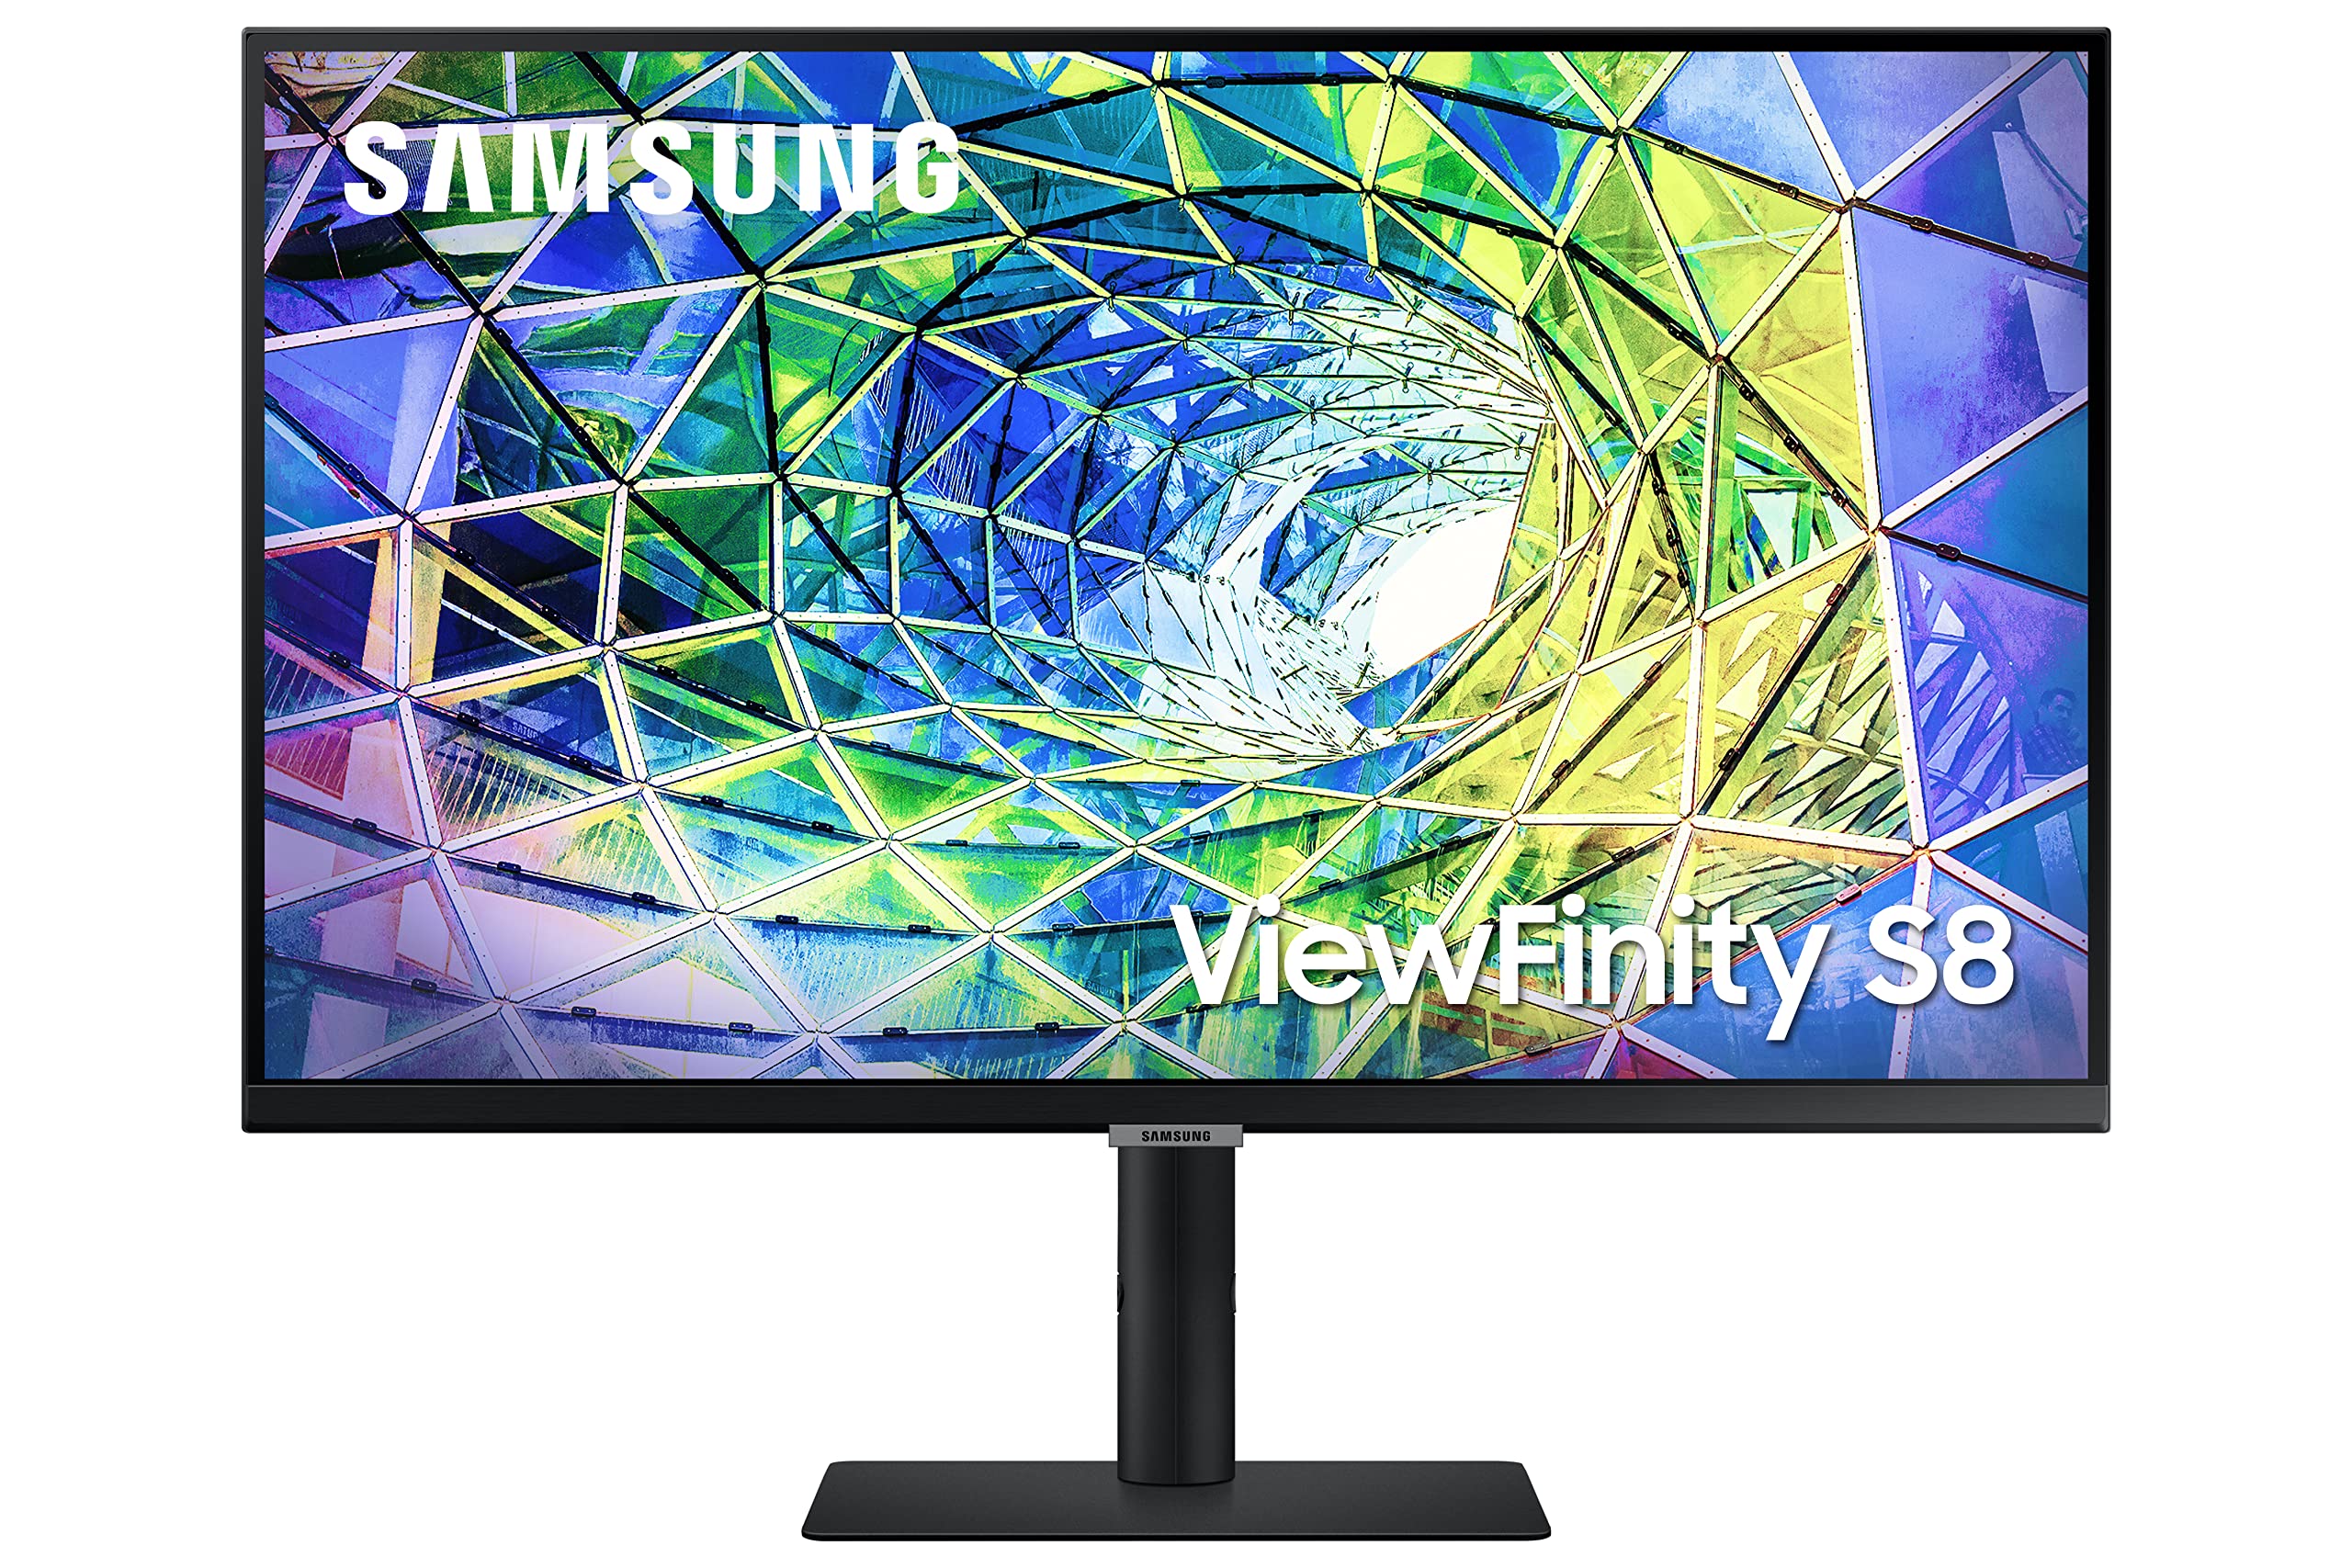 SAMSUNG S80UA 27-Inch ViewFinity 4K UHD (3840x2160) Computer Monitor, HDMI, USB Hub with USB-C, HDR10 (1 Billion Colors), Built-in Speakers, Height Adjustable Stand (LS27A80DUNNXZA)